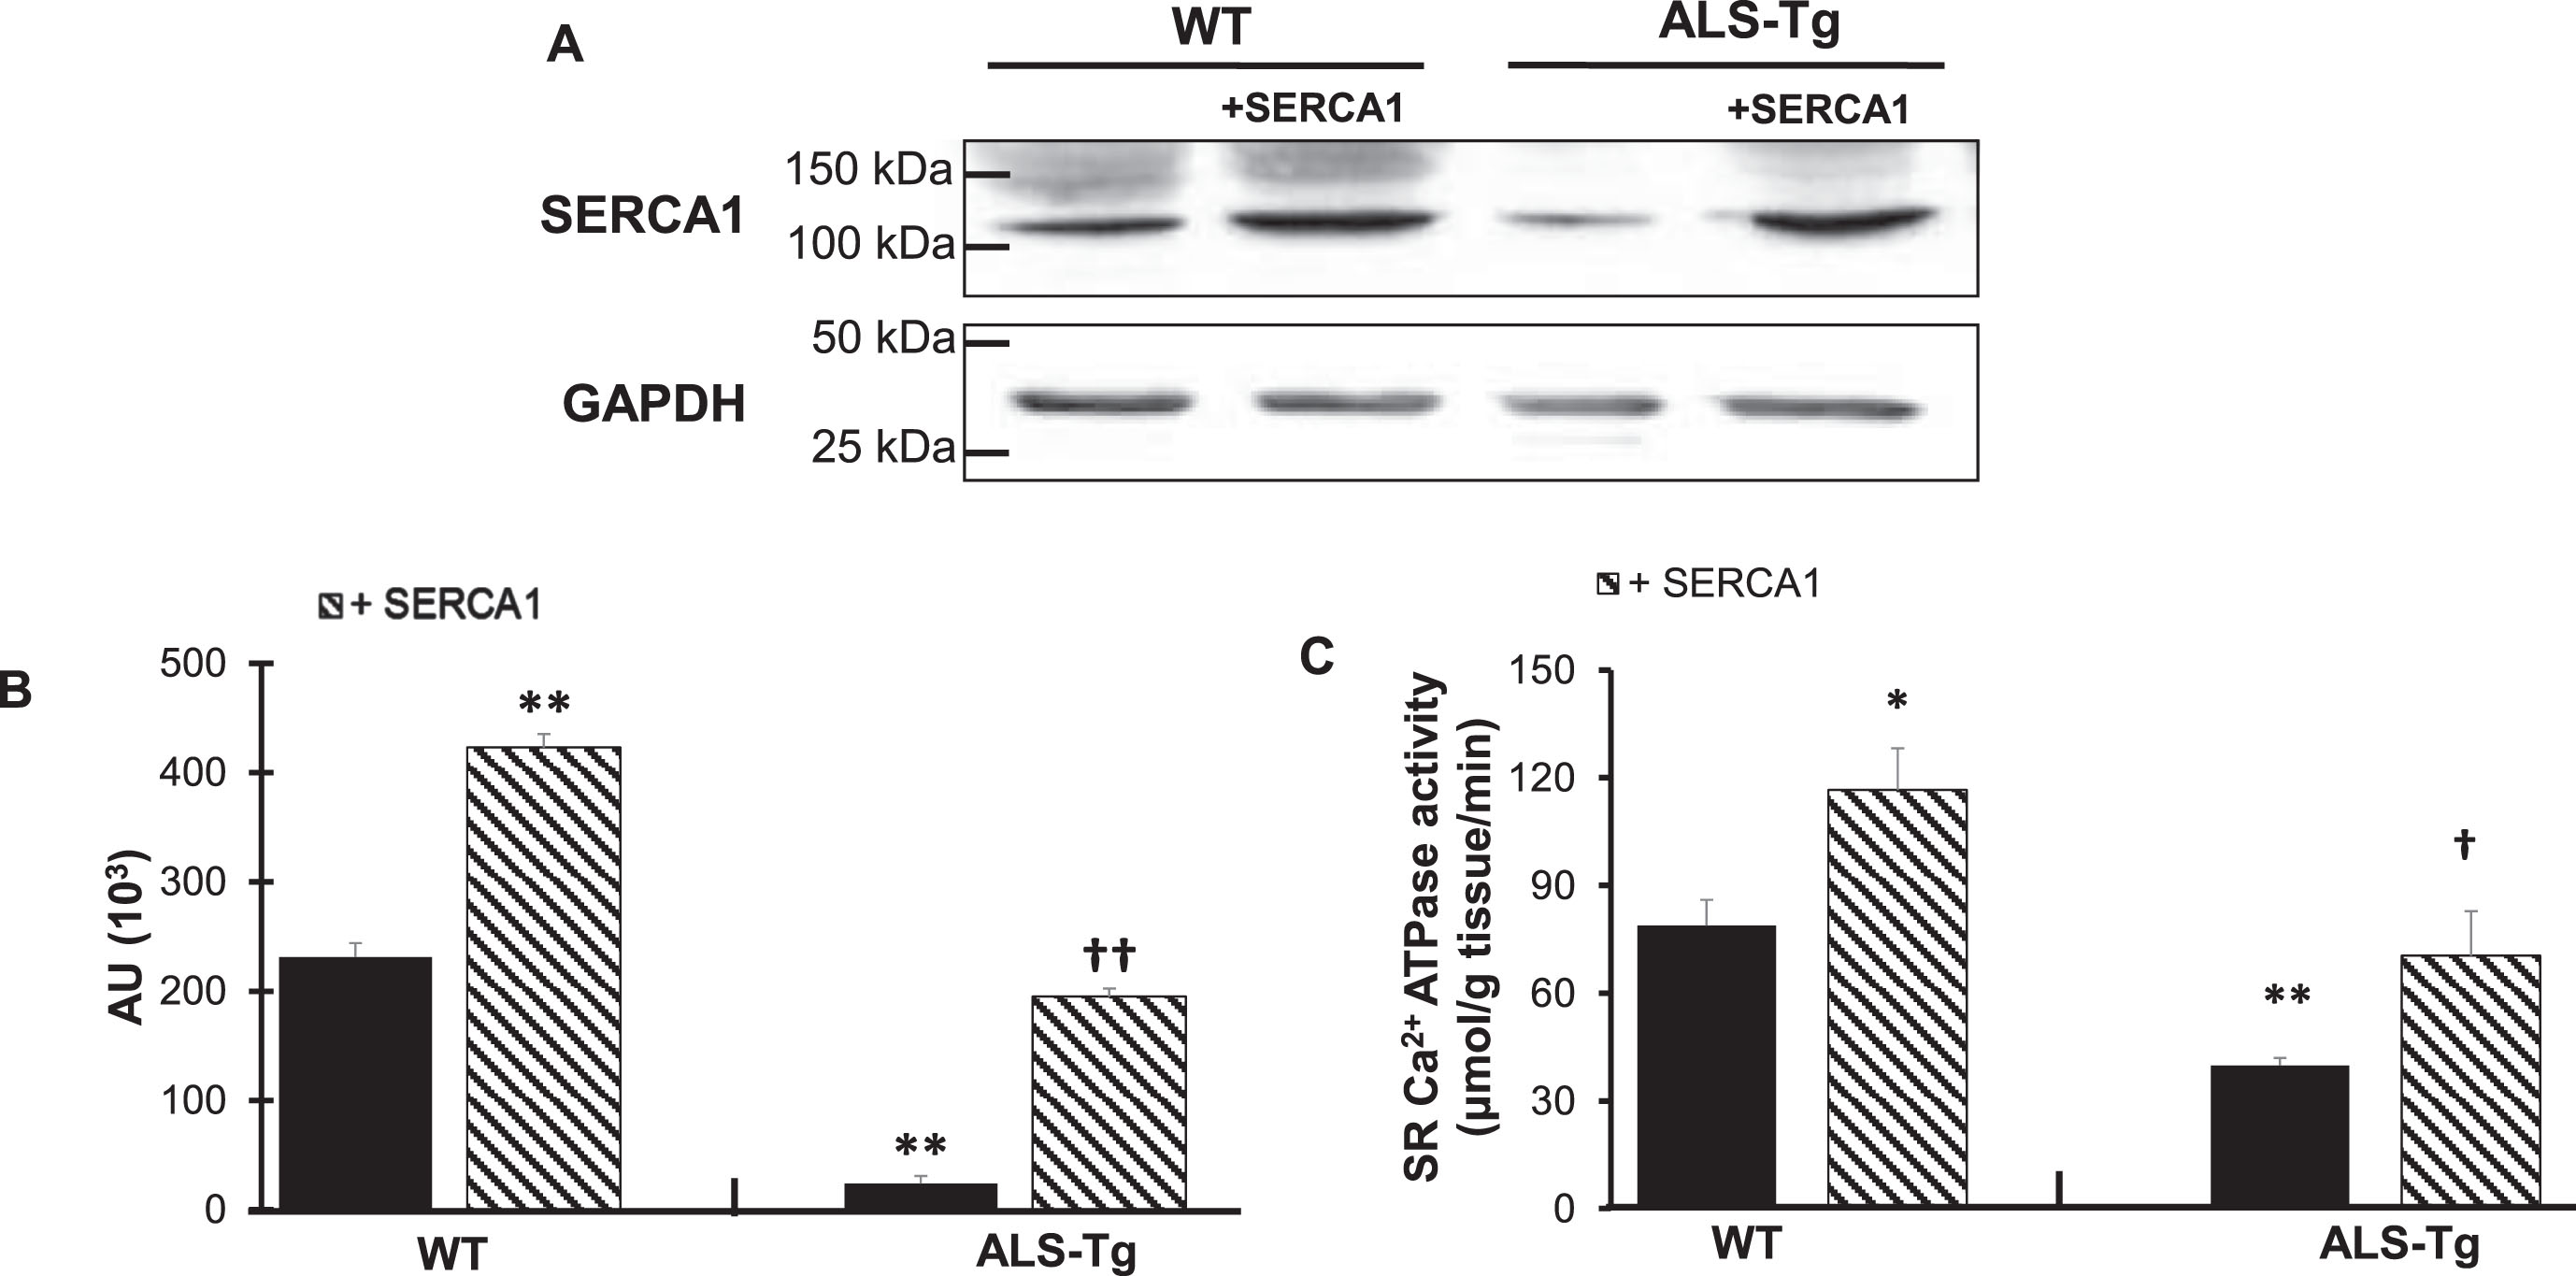 SERCA1 overexpression increases SERCA1 protein levels and maximal SR Ca2+-ATPase activity in quadriceps muscles in WT and ALS-Tg mice. A) Representative western blot image for SERCA1 protein level in quadriceps (QUAD) muscle from WT and ALS-Tg mice with and without SERCA1 overexpression. B) Quantitative analysis of western blot images by densitometry. Data shown are in arbitrary units (AU) for WT (n = 4; 1 male and 3 female), WT/+SERCA1 (n = 4; 1 male and 3 female), ALS-Tg (n = 4; 1 male and 3 female) and ALS-Tg/+SERCA1 (n = 4; 1 male and 3 female). C) Maximal SR Ca2+-ATPase activity of QUAD muscle of WT (n = 4), WT/+SERCA1 (n = 4), ALS-Tg (n = 4) and ALS-Tg/+SERCA1 (n = 4). Average data (B, C) represent mean±SEM. *p < 0.05 vs. WT, **p < 0.01 vs. WT, †p < 0.05 vs. ALS-Tg, ††p < 0.01 vs. ALS-Tg.